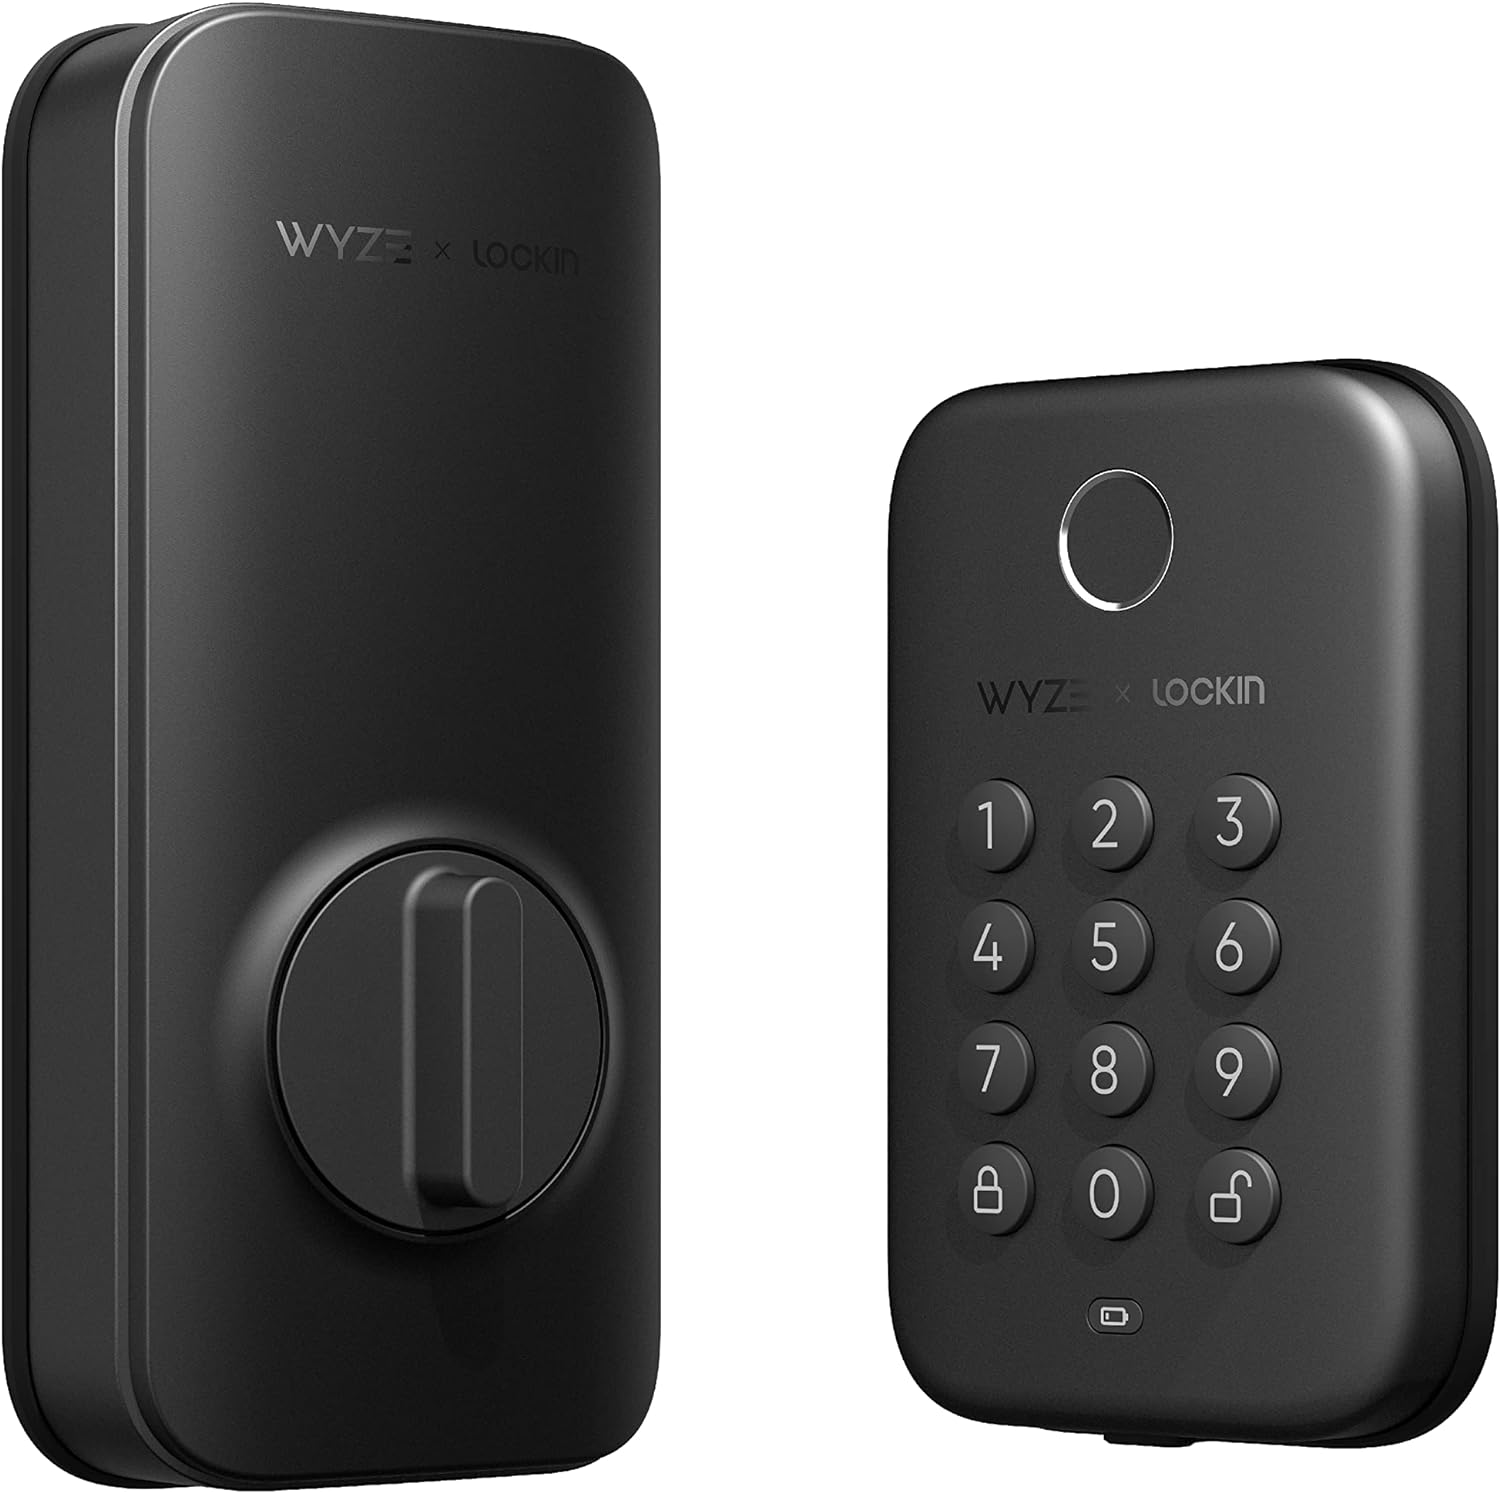 A Wyze Lock Bolt door lock and keypad on a white background.